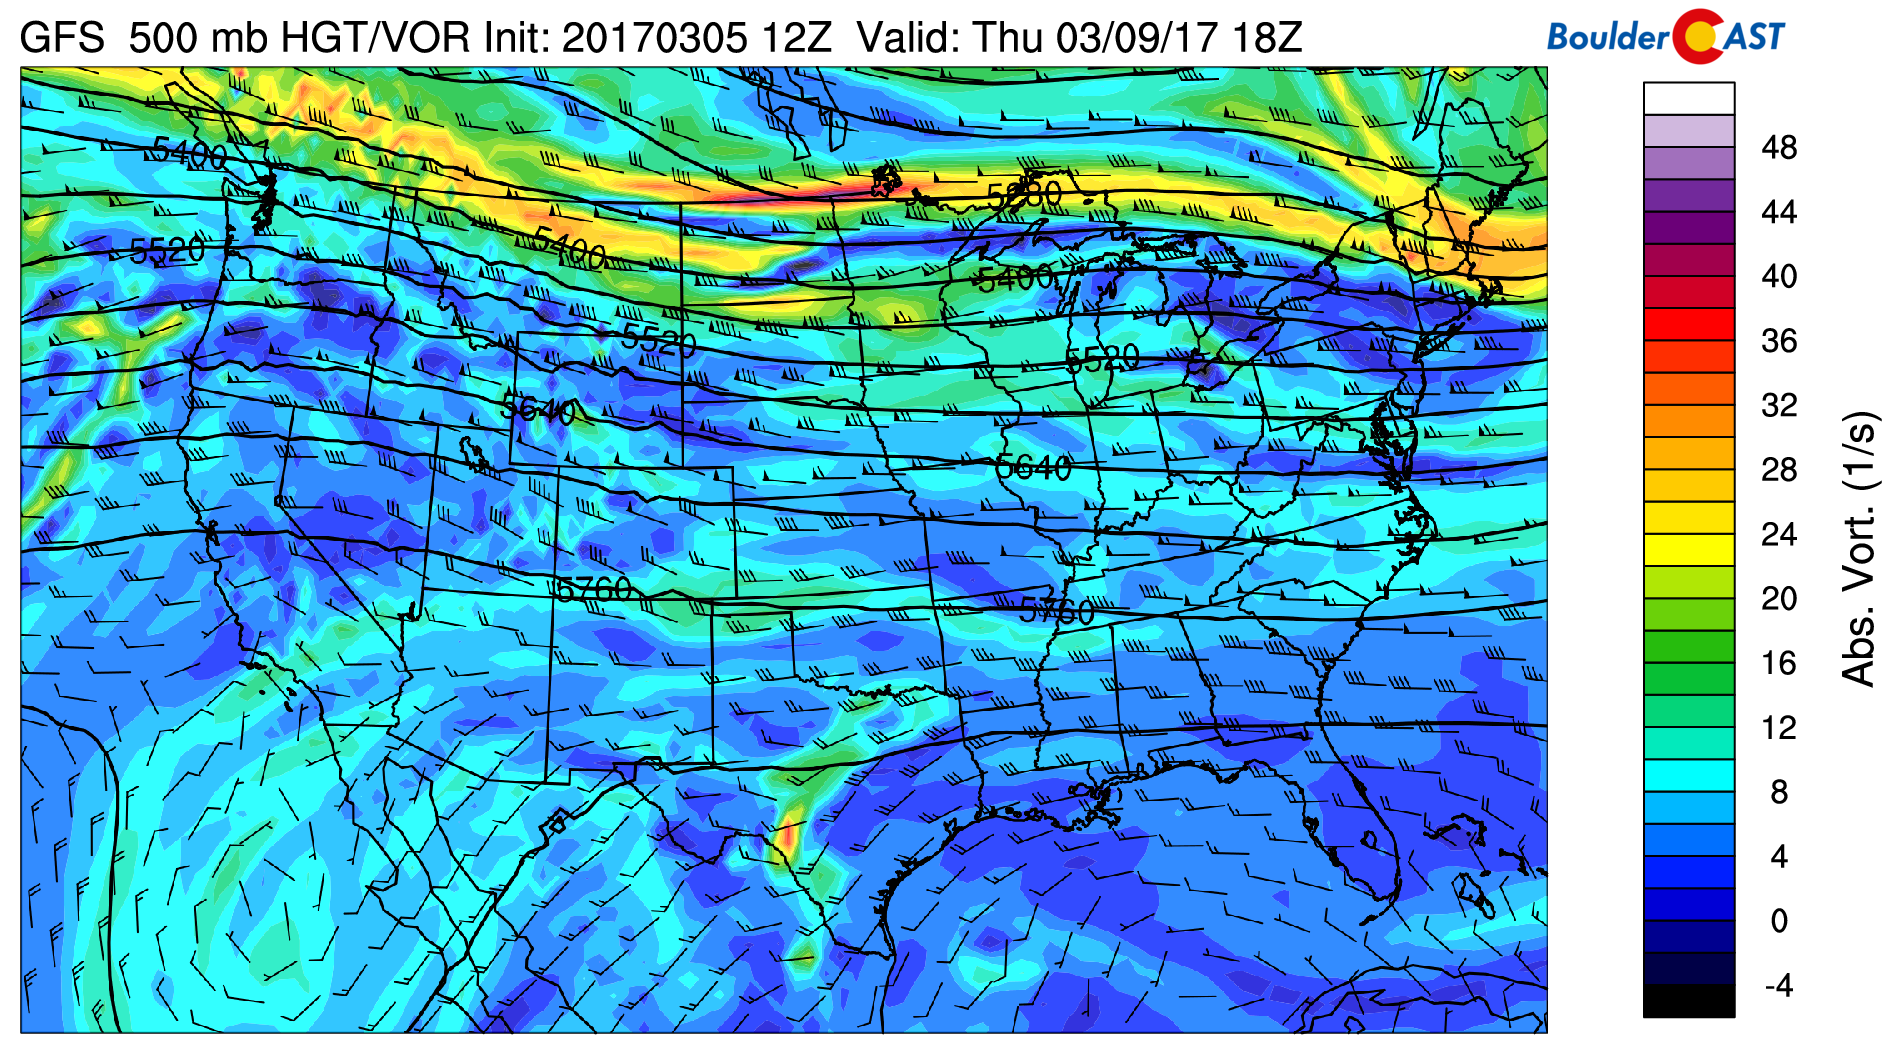 GFS 500 mb absolute vorticity for Thursday 